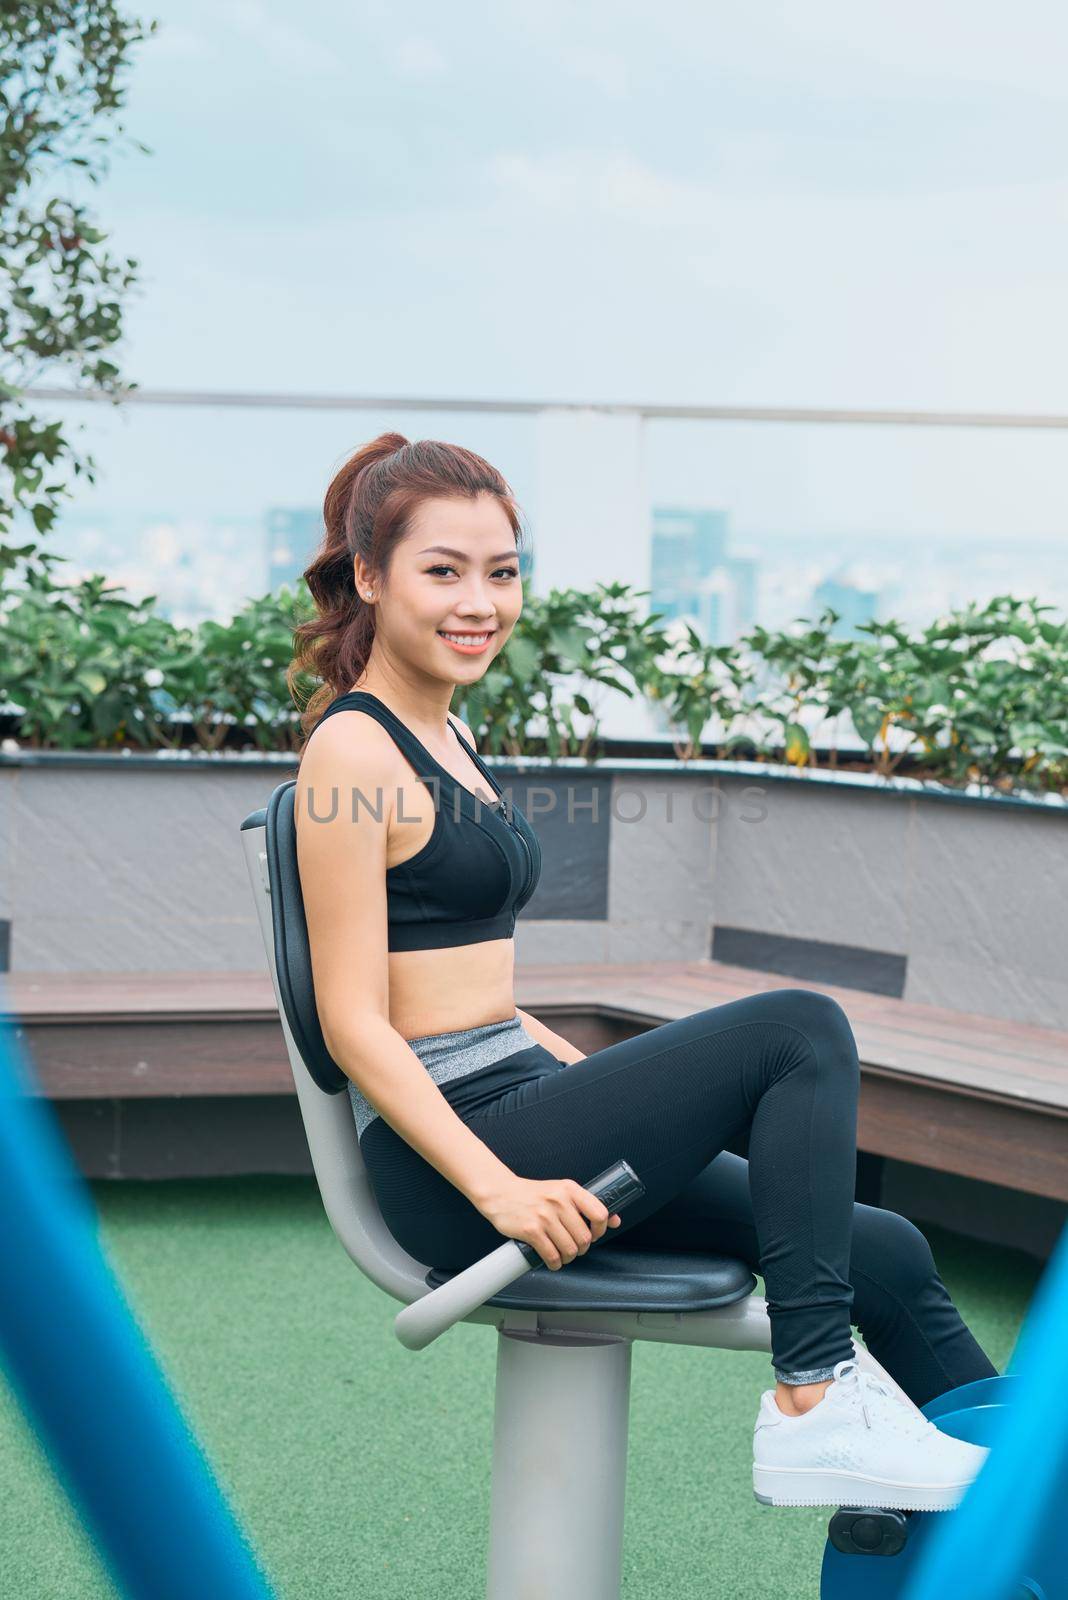 Asian woman exercising at outdoors gym playground equipment by makidotvn